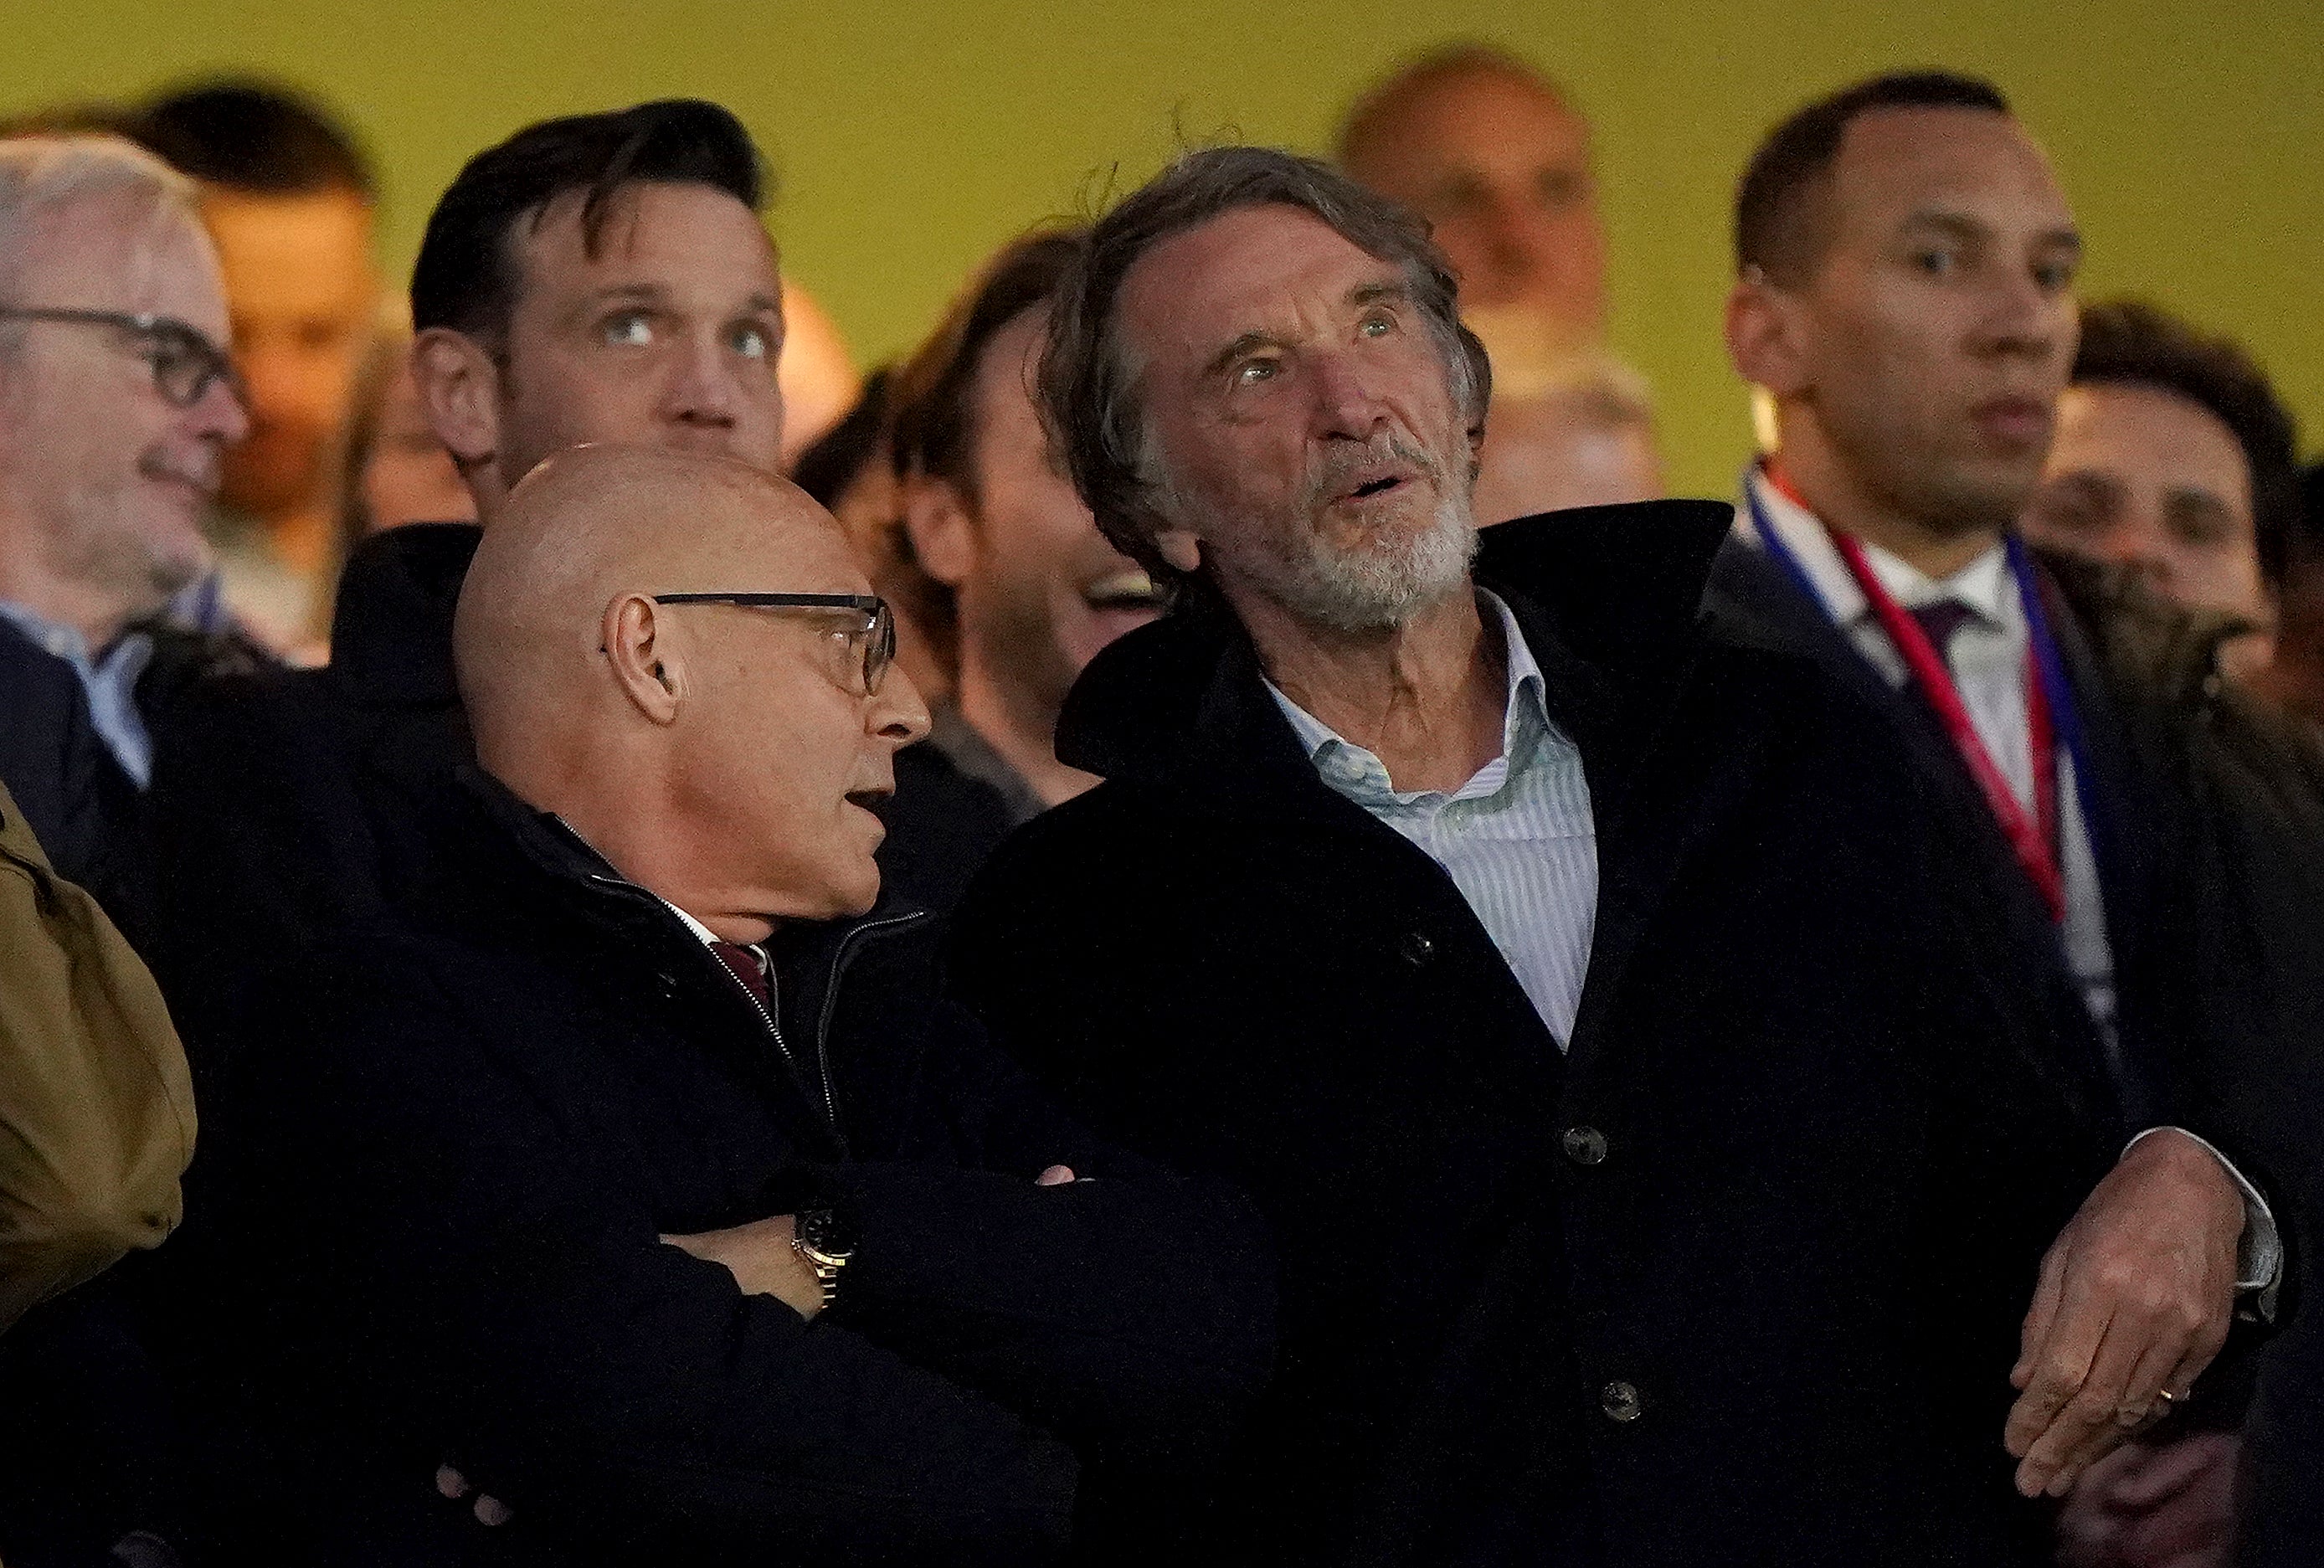 Jim Ratcliffe and Dave Brailsford look set to overhaul Man United’s structure